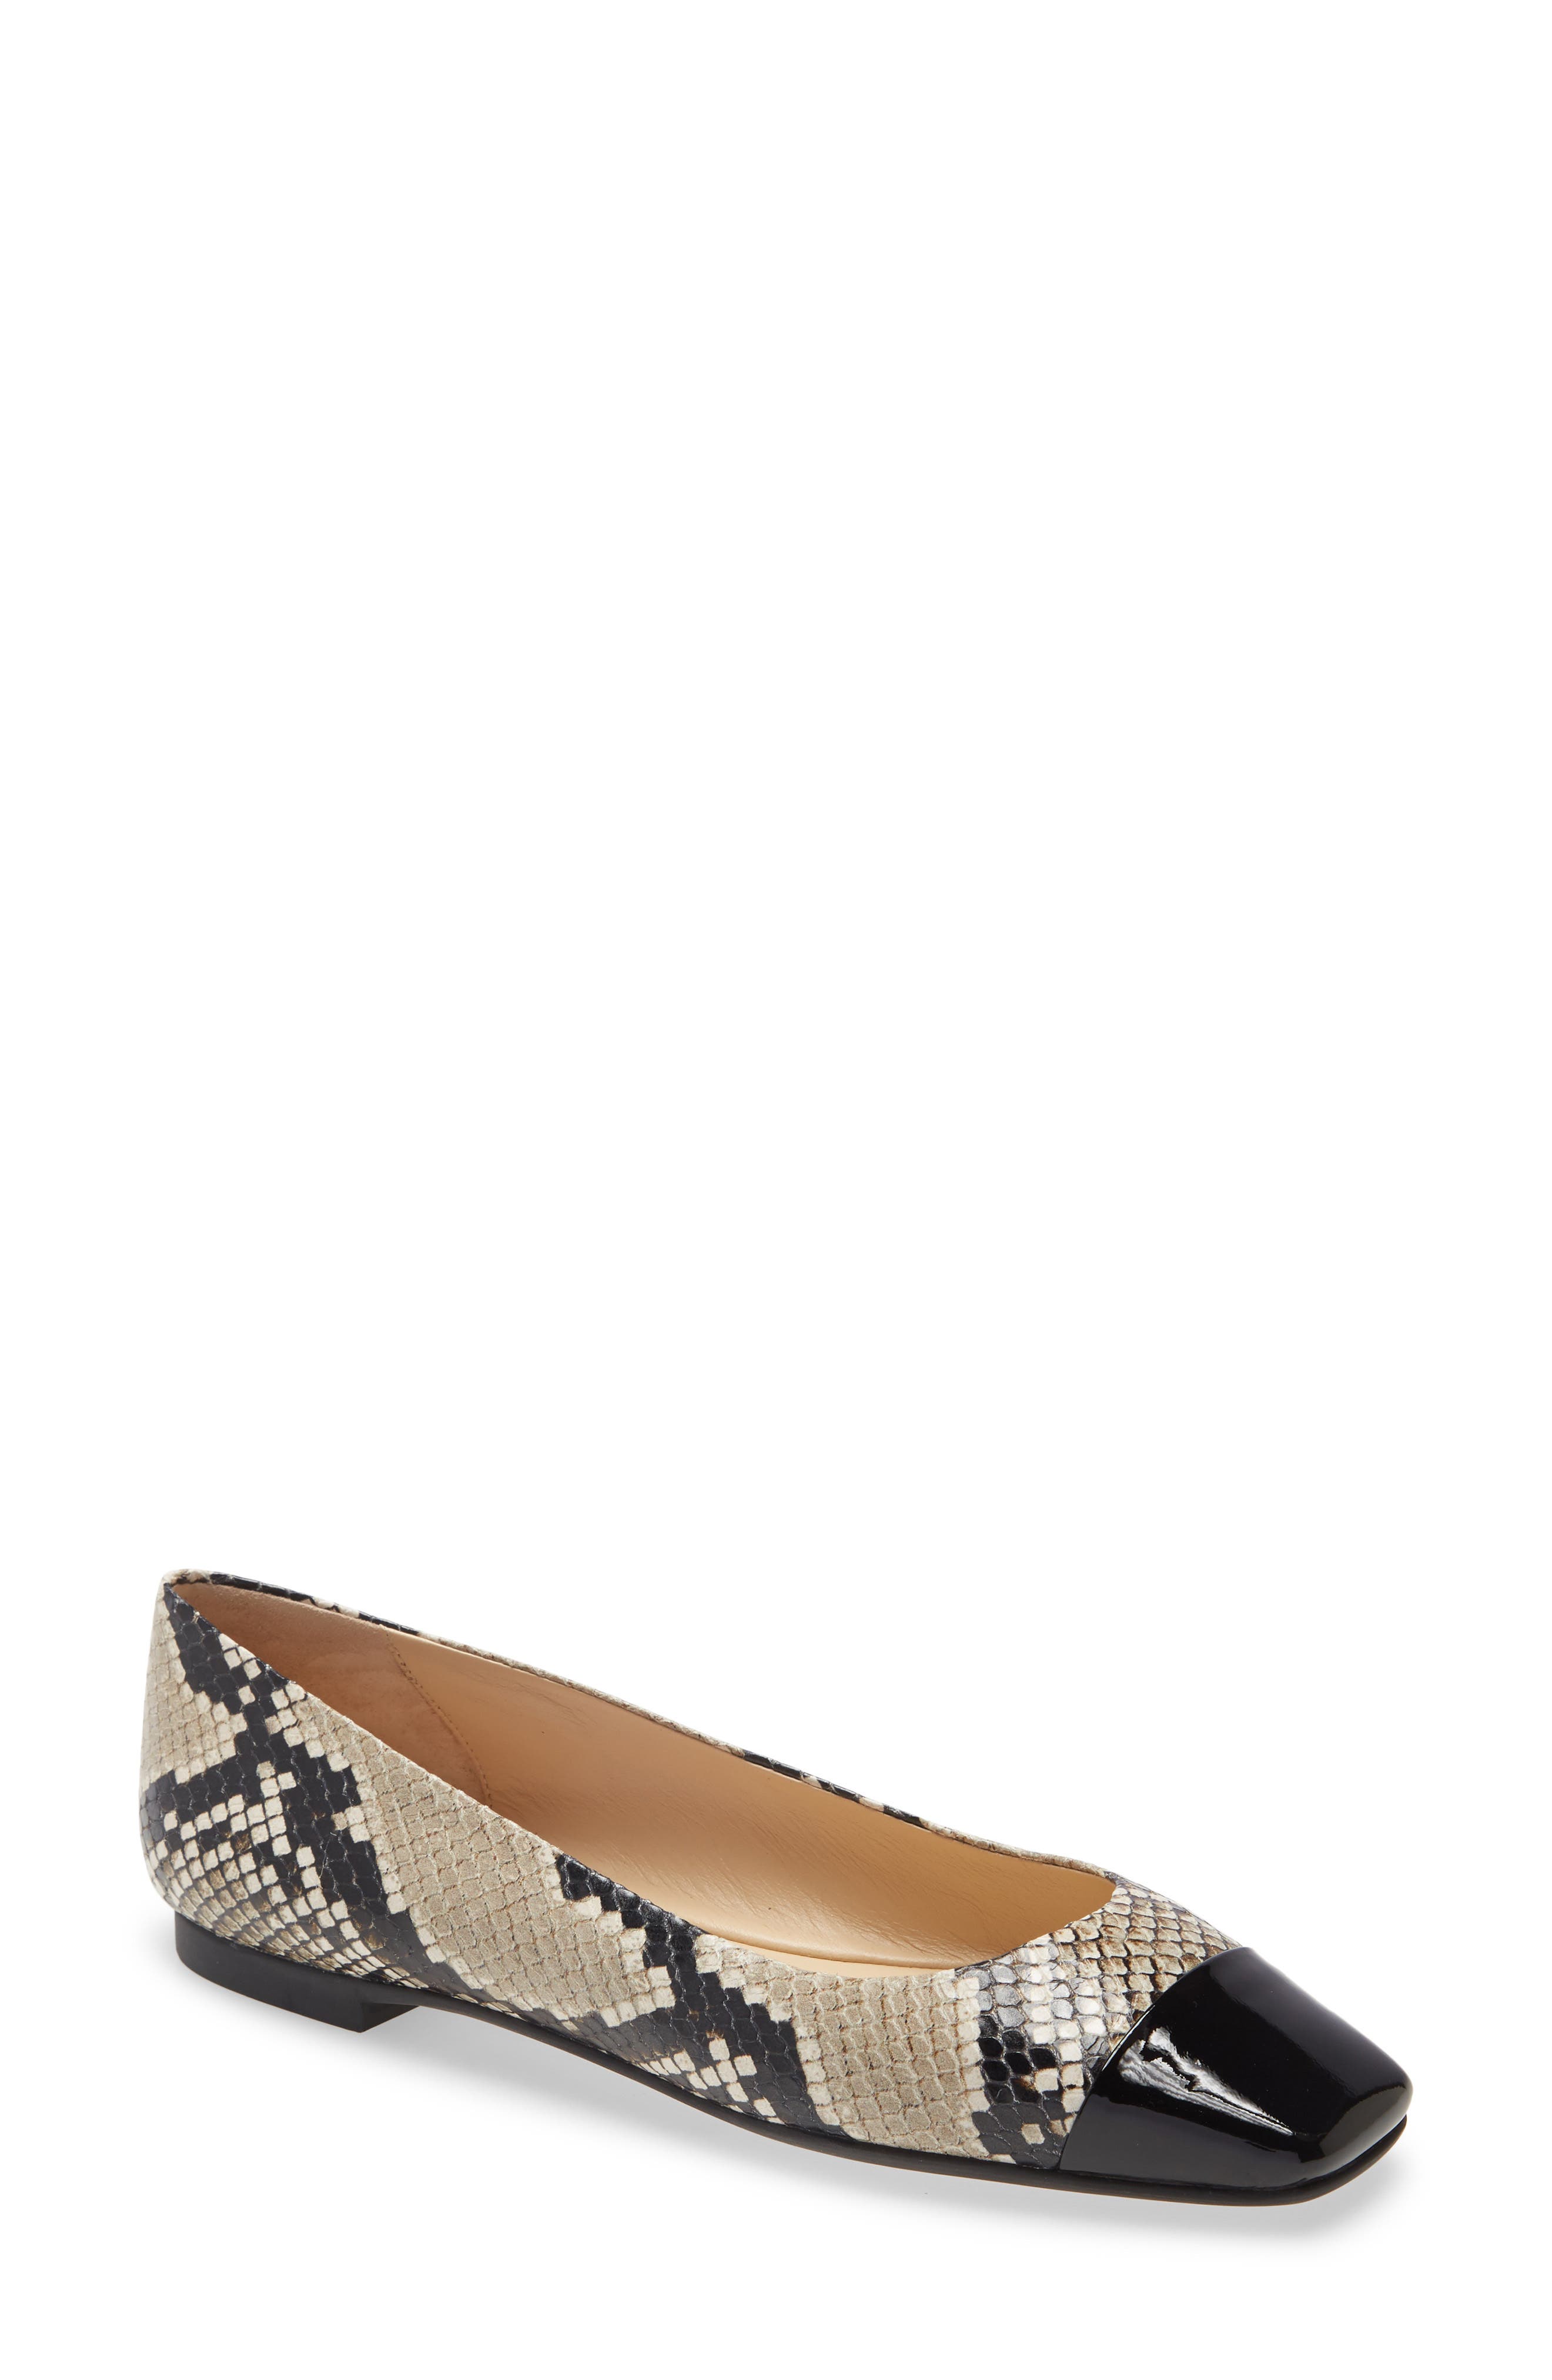 nordstrom jimmy choo shoes